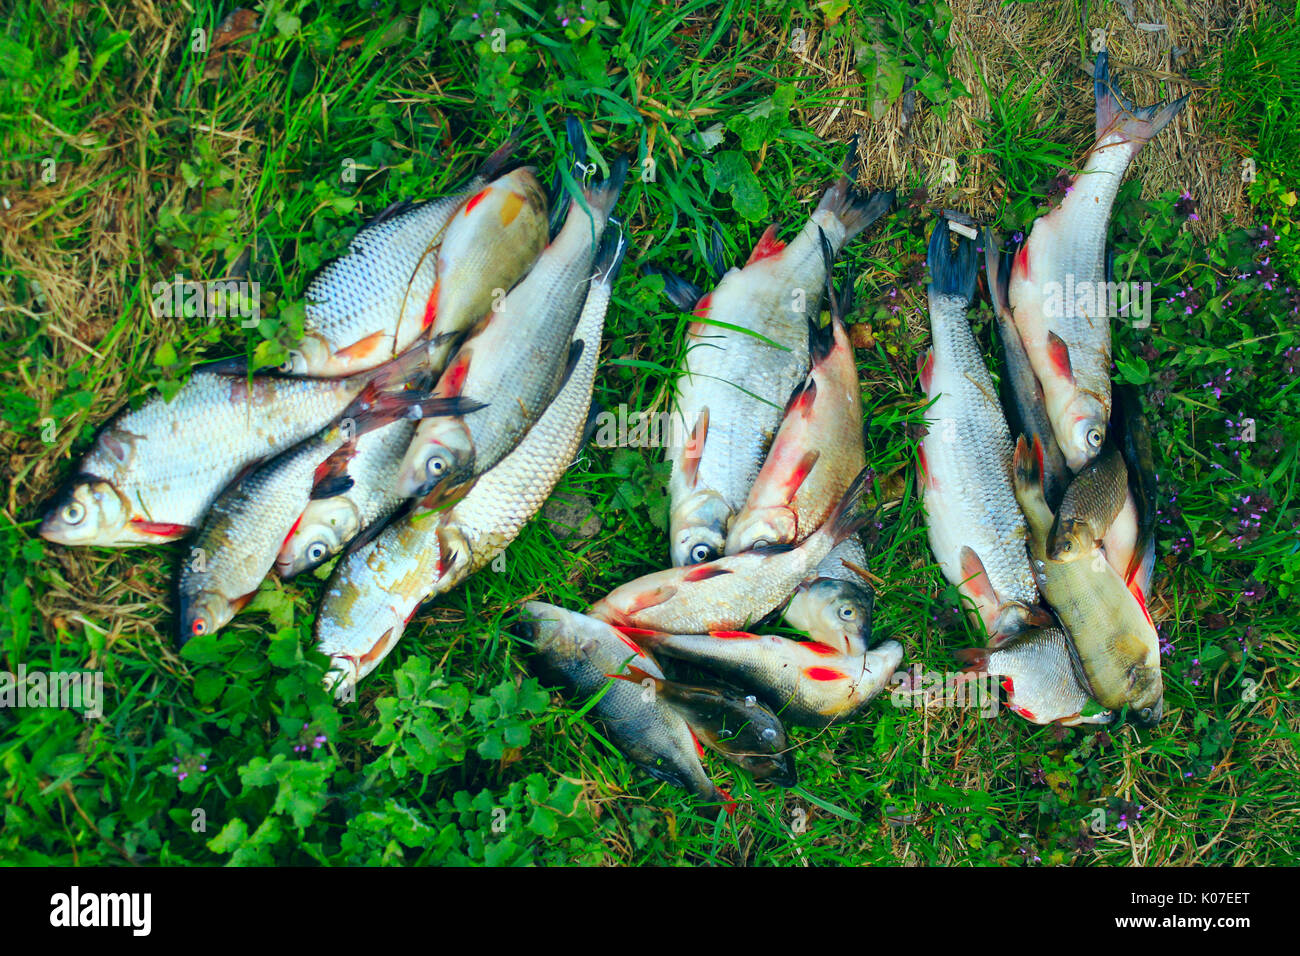 Rich catch of fishes. Caught fishes perches common nases breames and crucian on the grass. Stock Photo